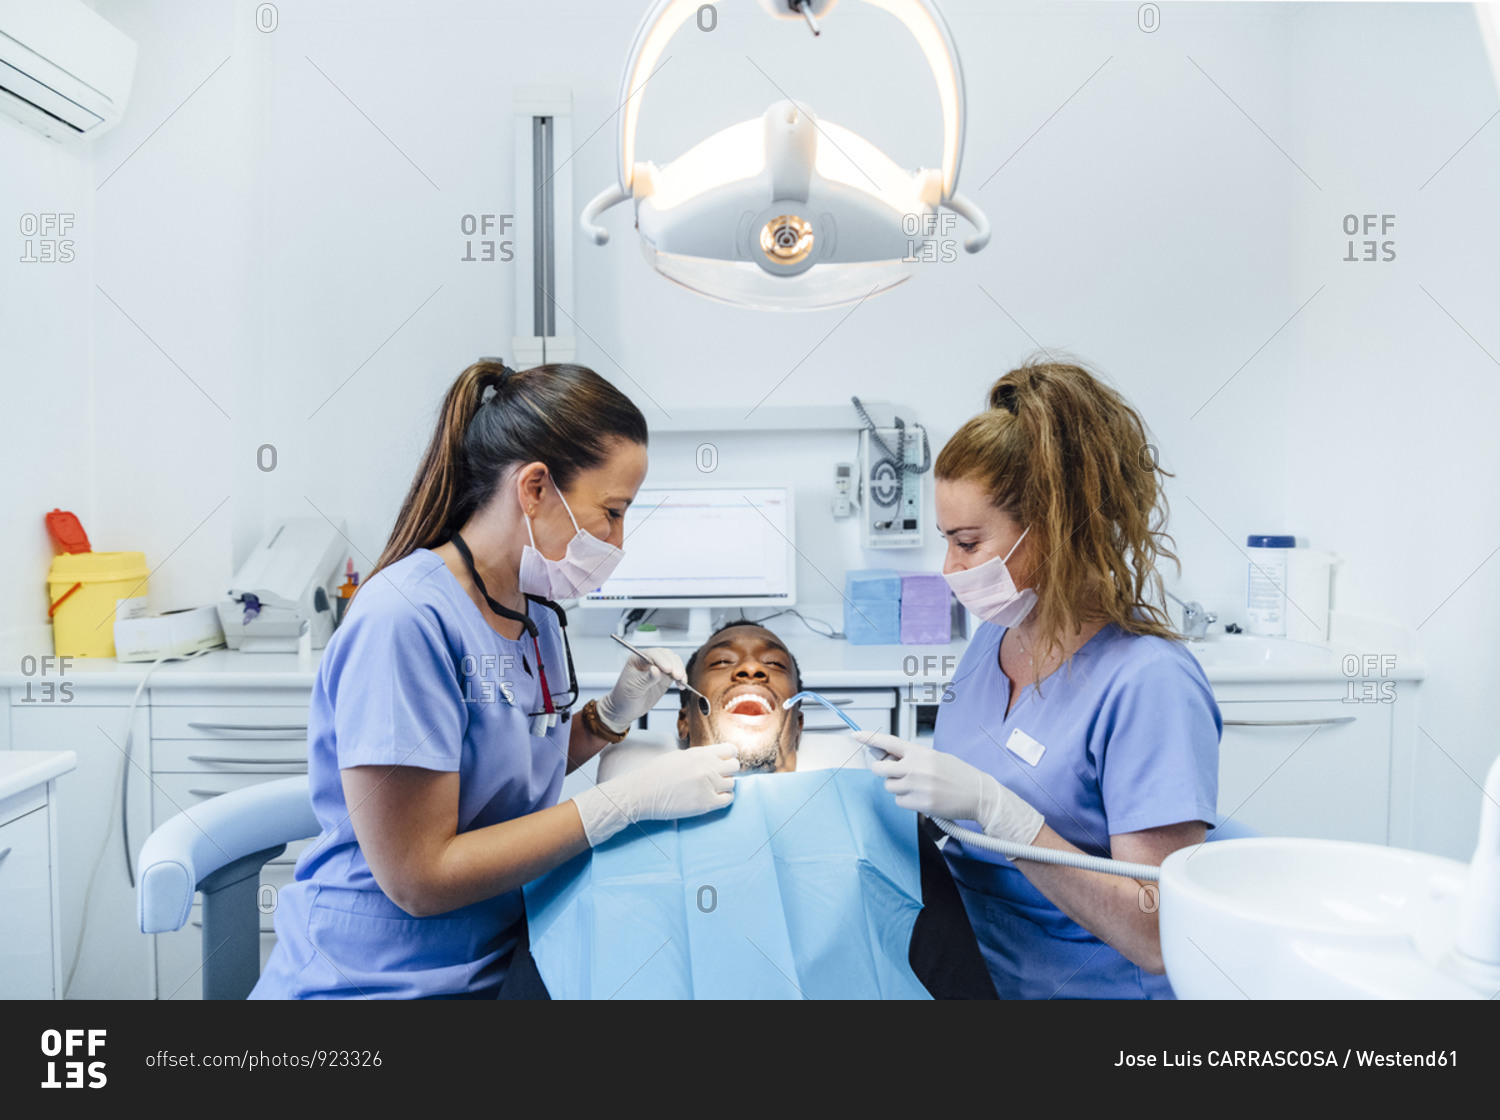 Female dentist and assistant attending patient in medical practice